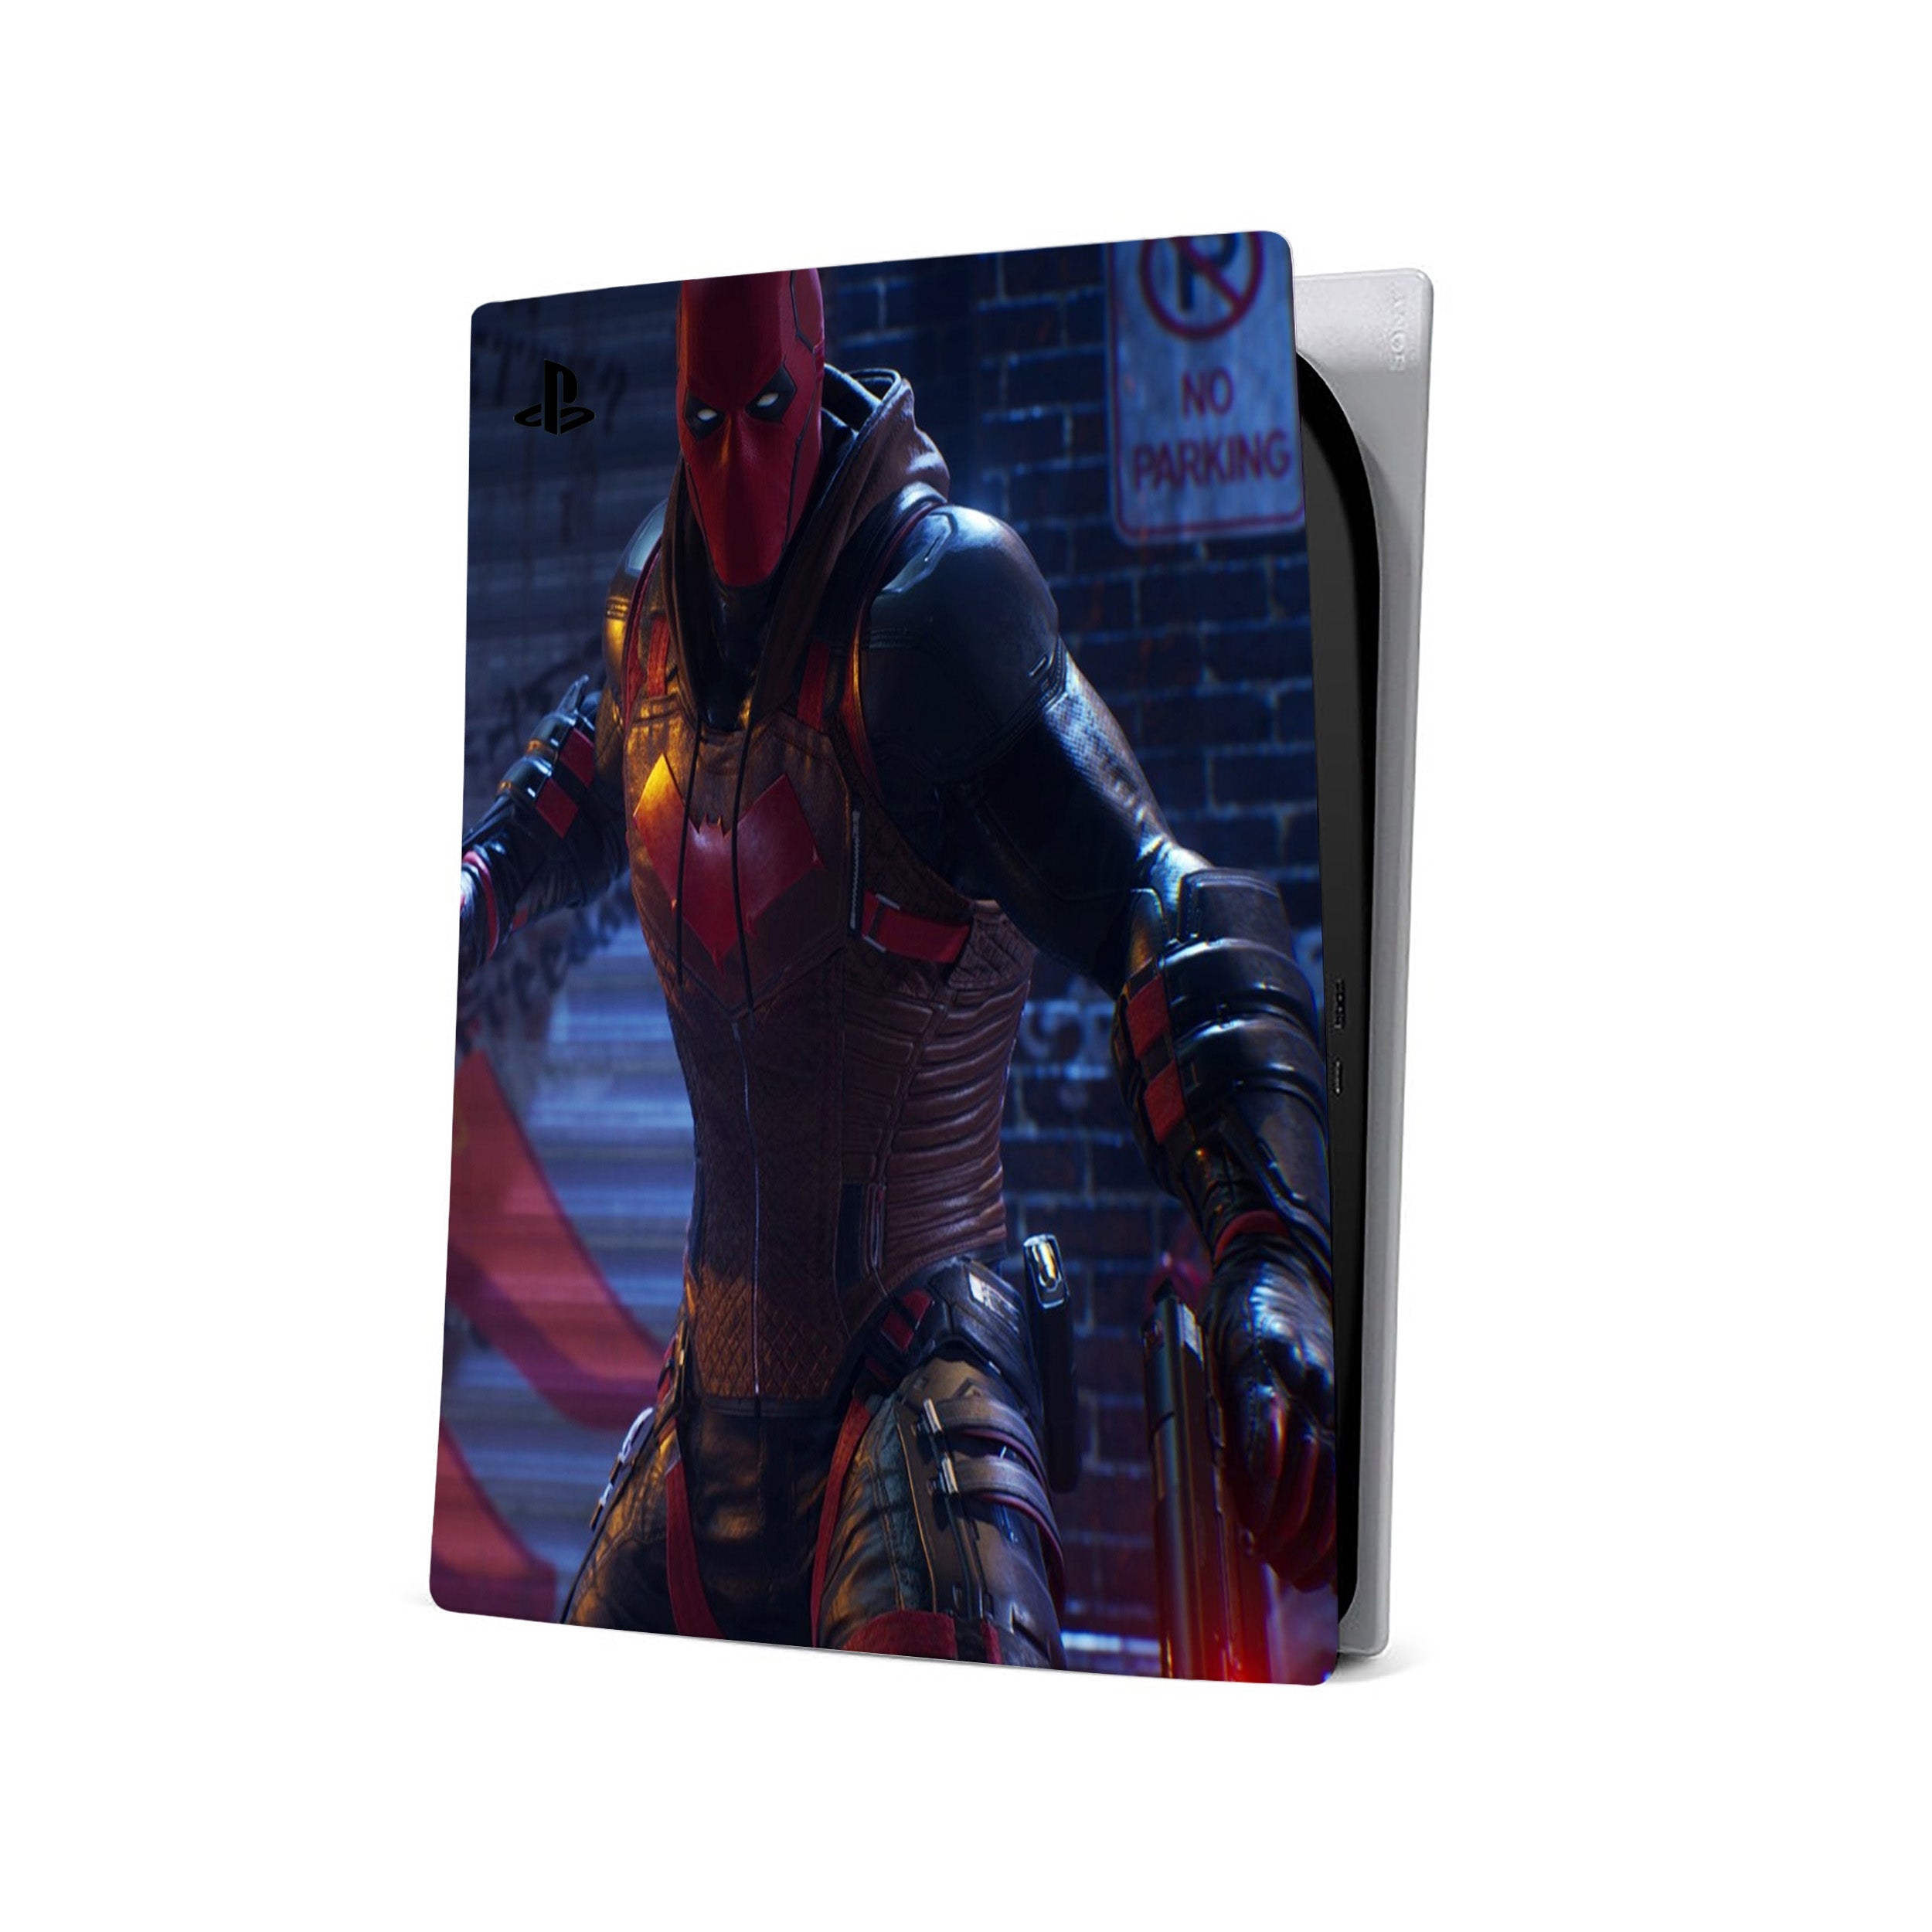 A video game skin featuring a DC Comics Red Hood design for the PS5.